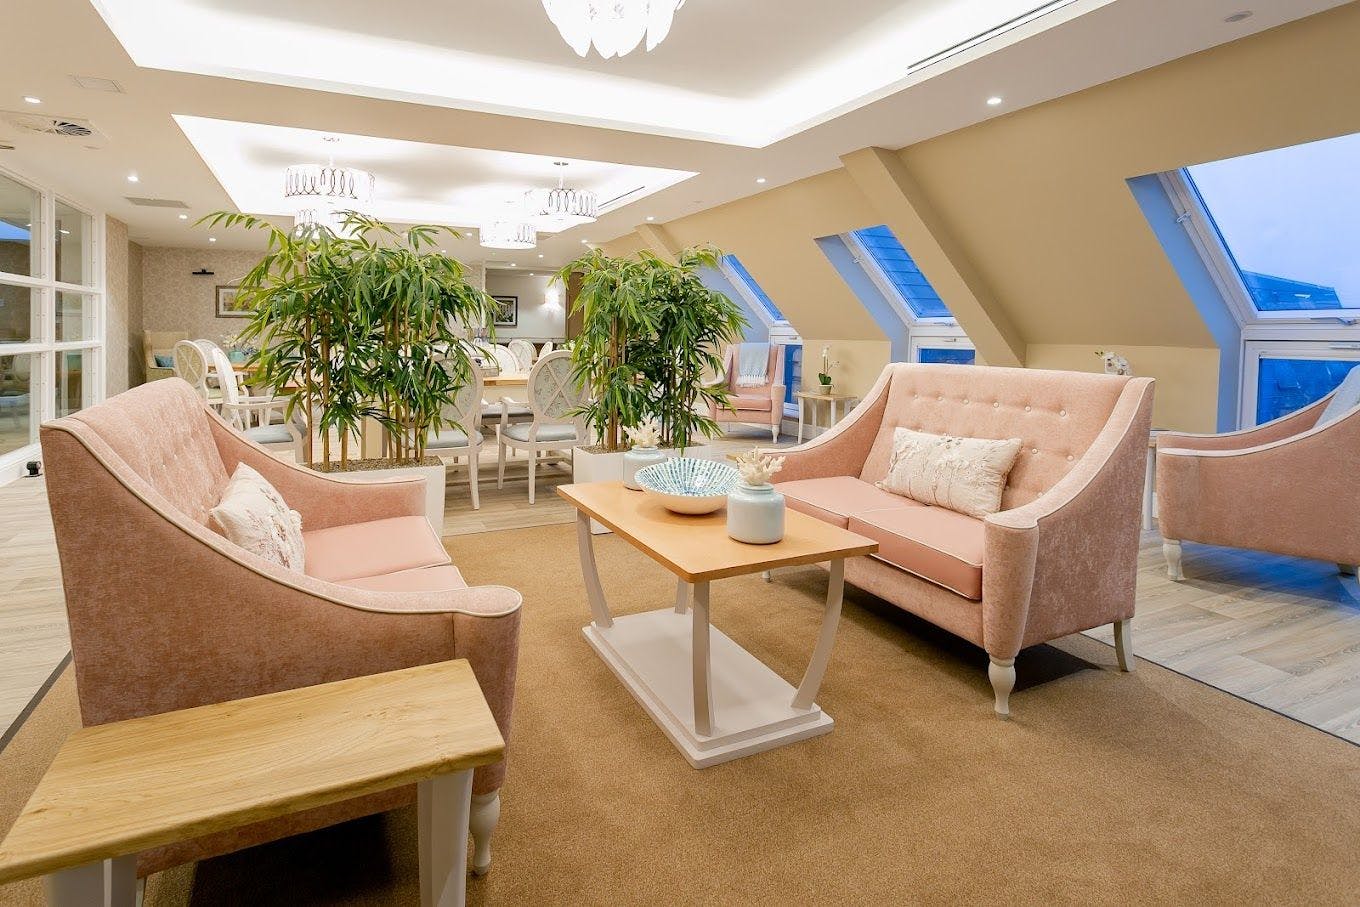 Lounge Lounge at Chapter House Care Home in Beverley, East Riding of Yorkshire